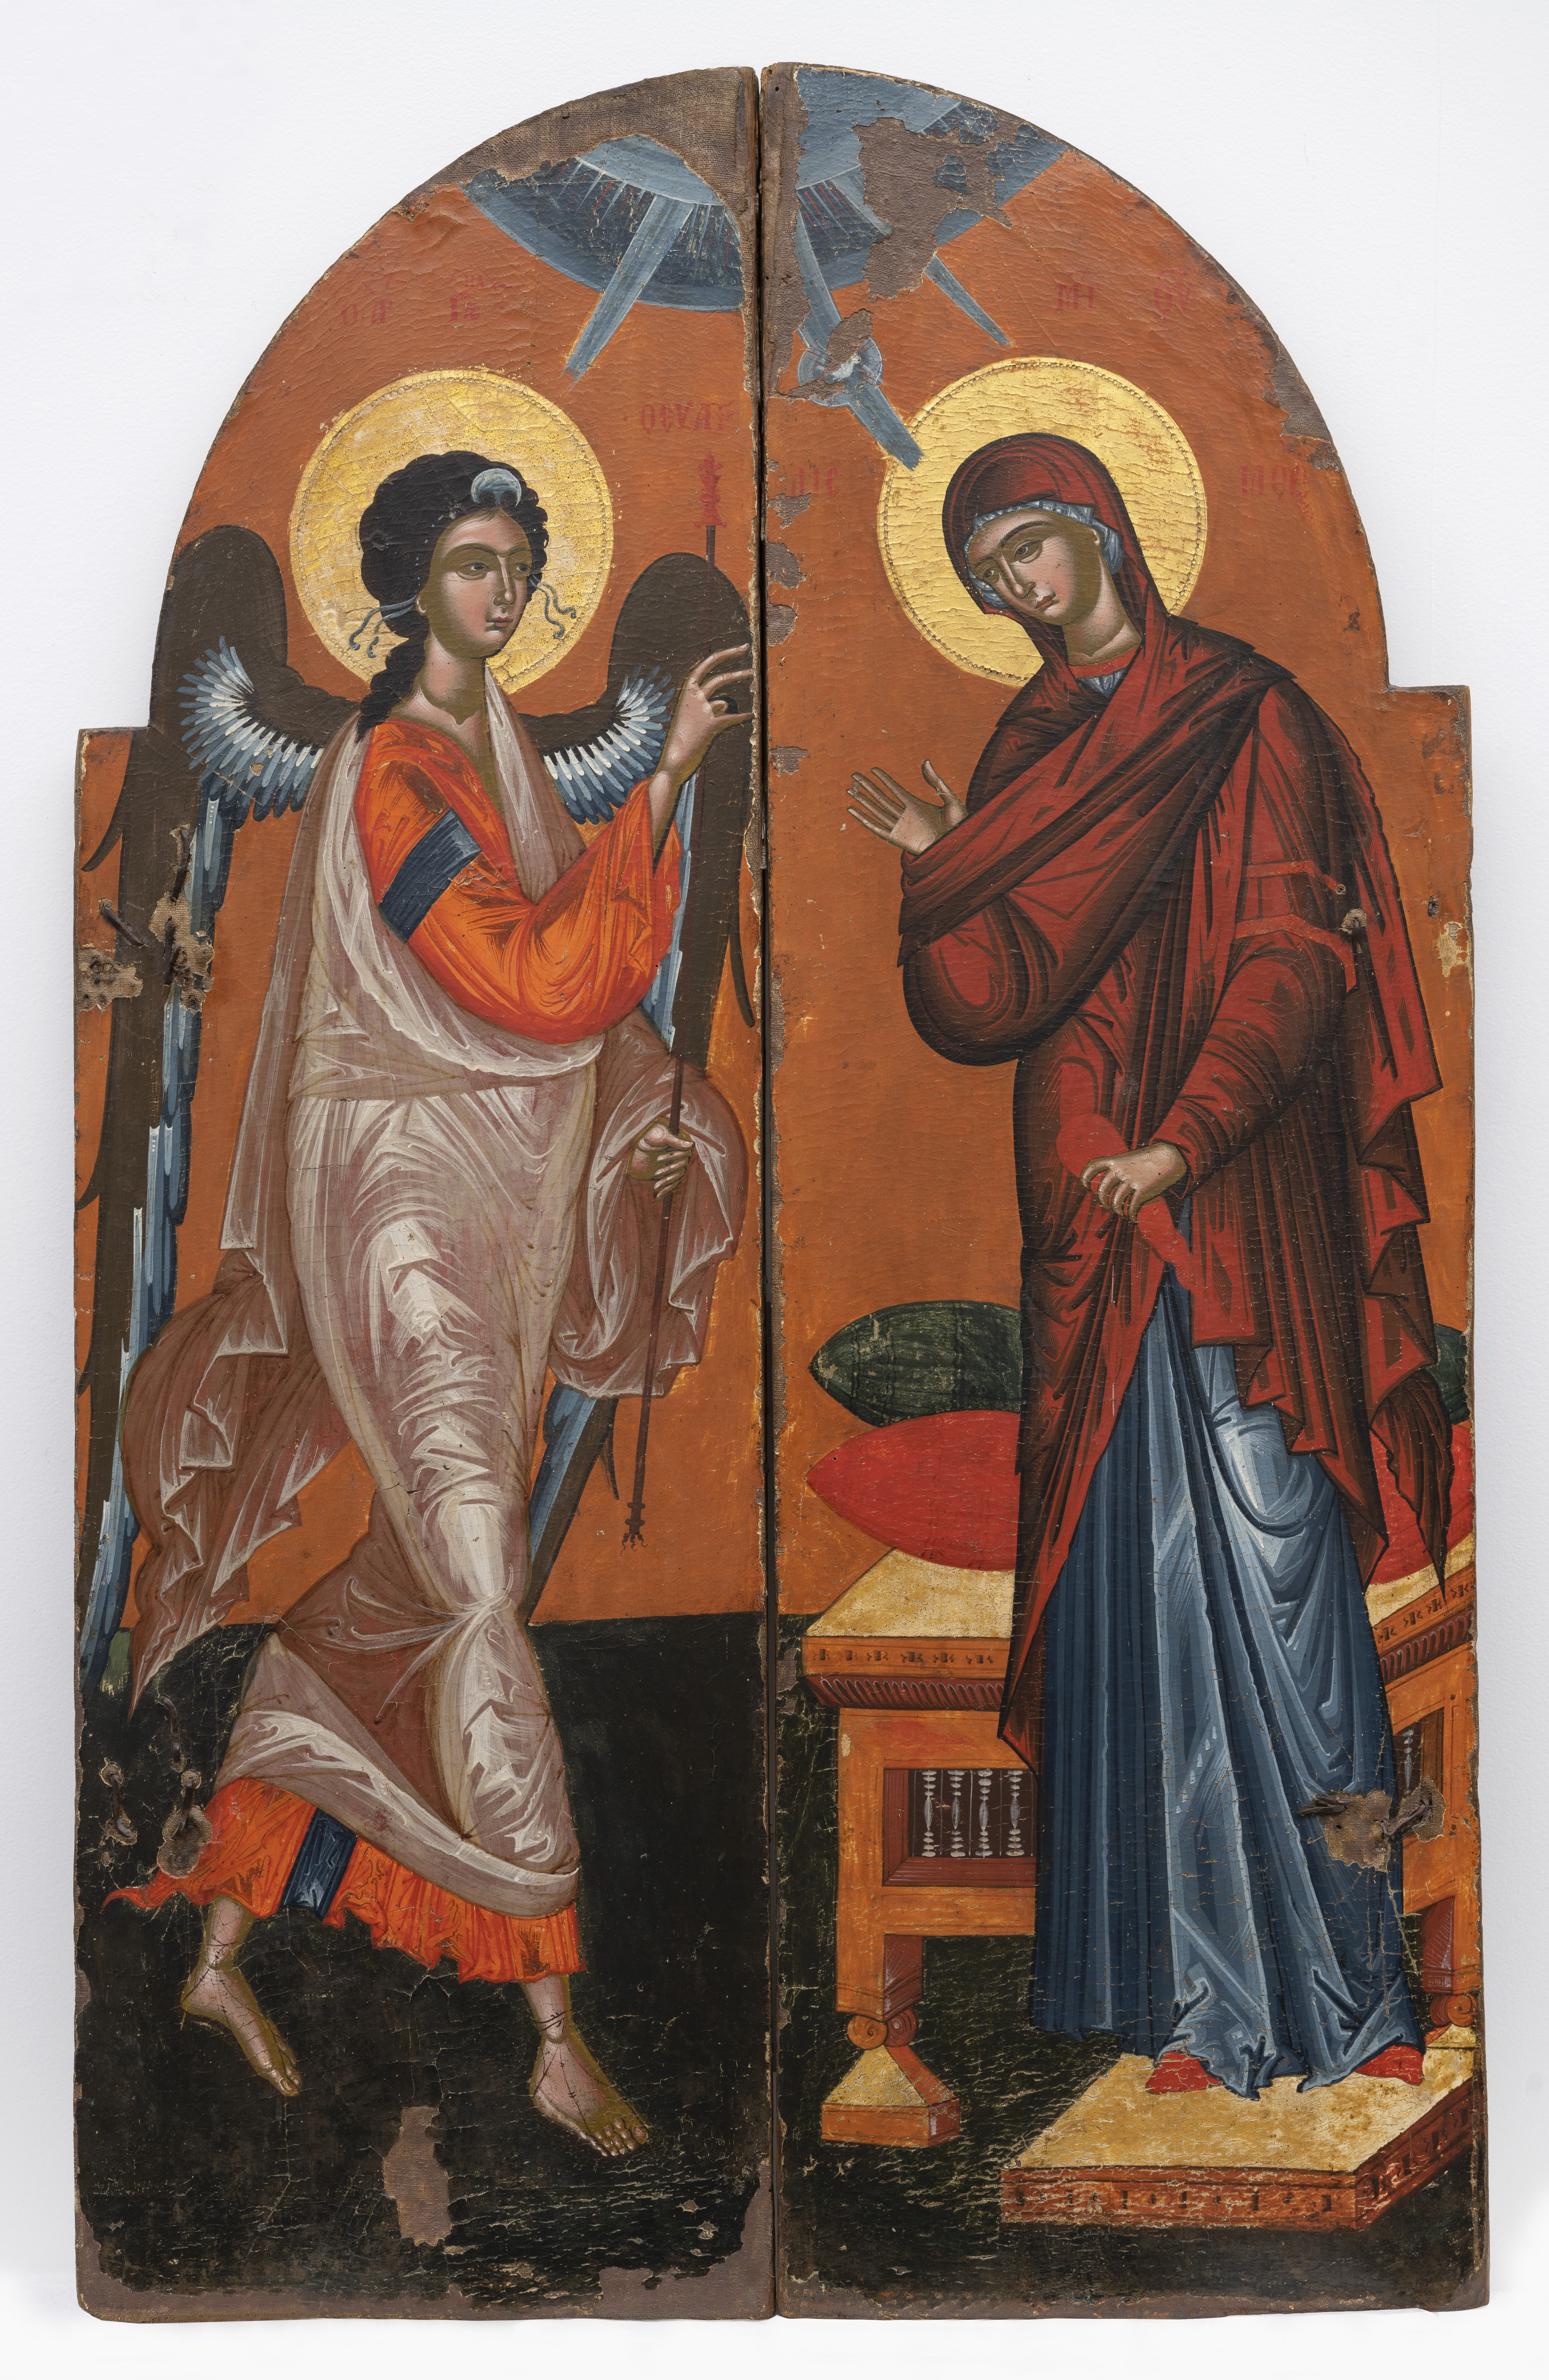 <p>Onoufrios of Neokastro,&nbsp;<em>Royal Doors with the Annunciation</em>, Albania or northern Greece, 16th century,&nbsp;egg tempera and gesso on canvas over wood, private collection, London</p>
